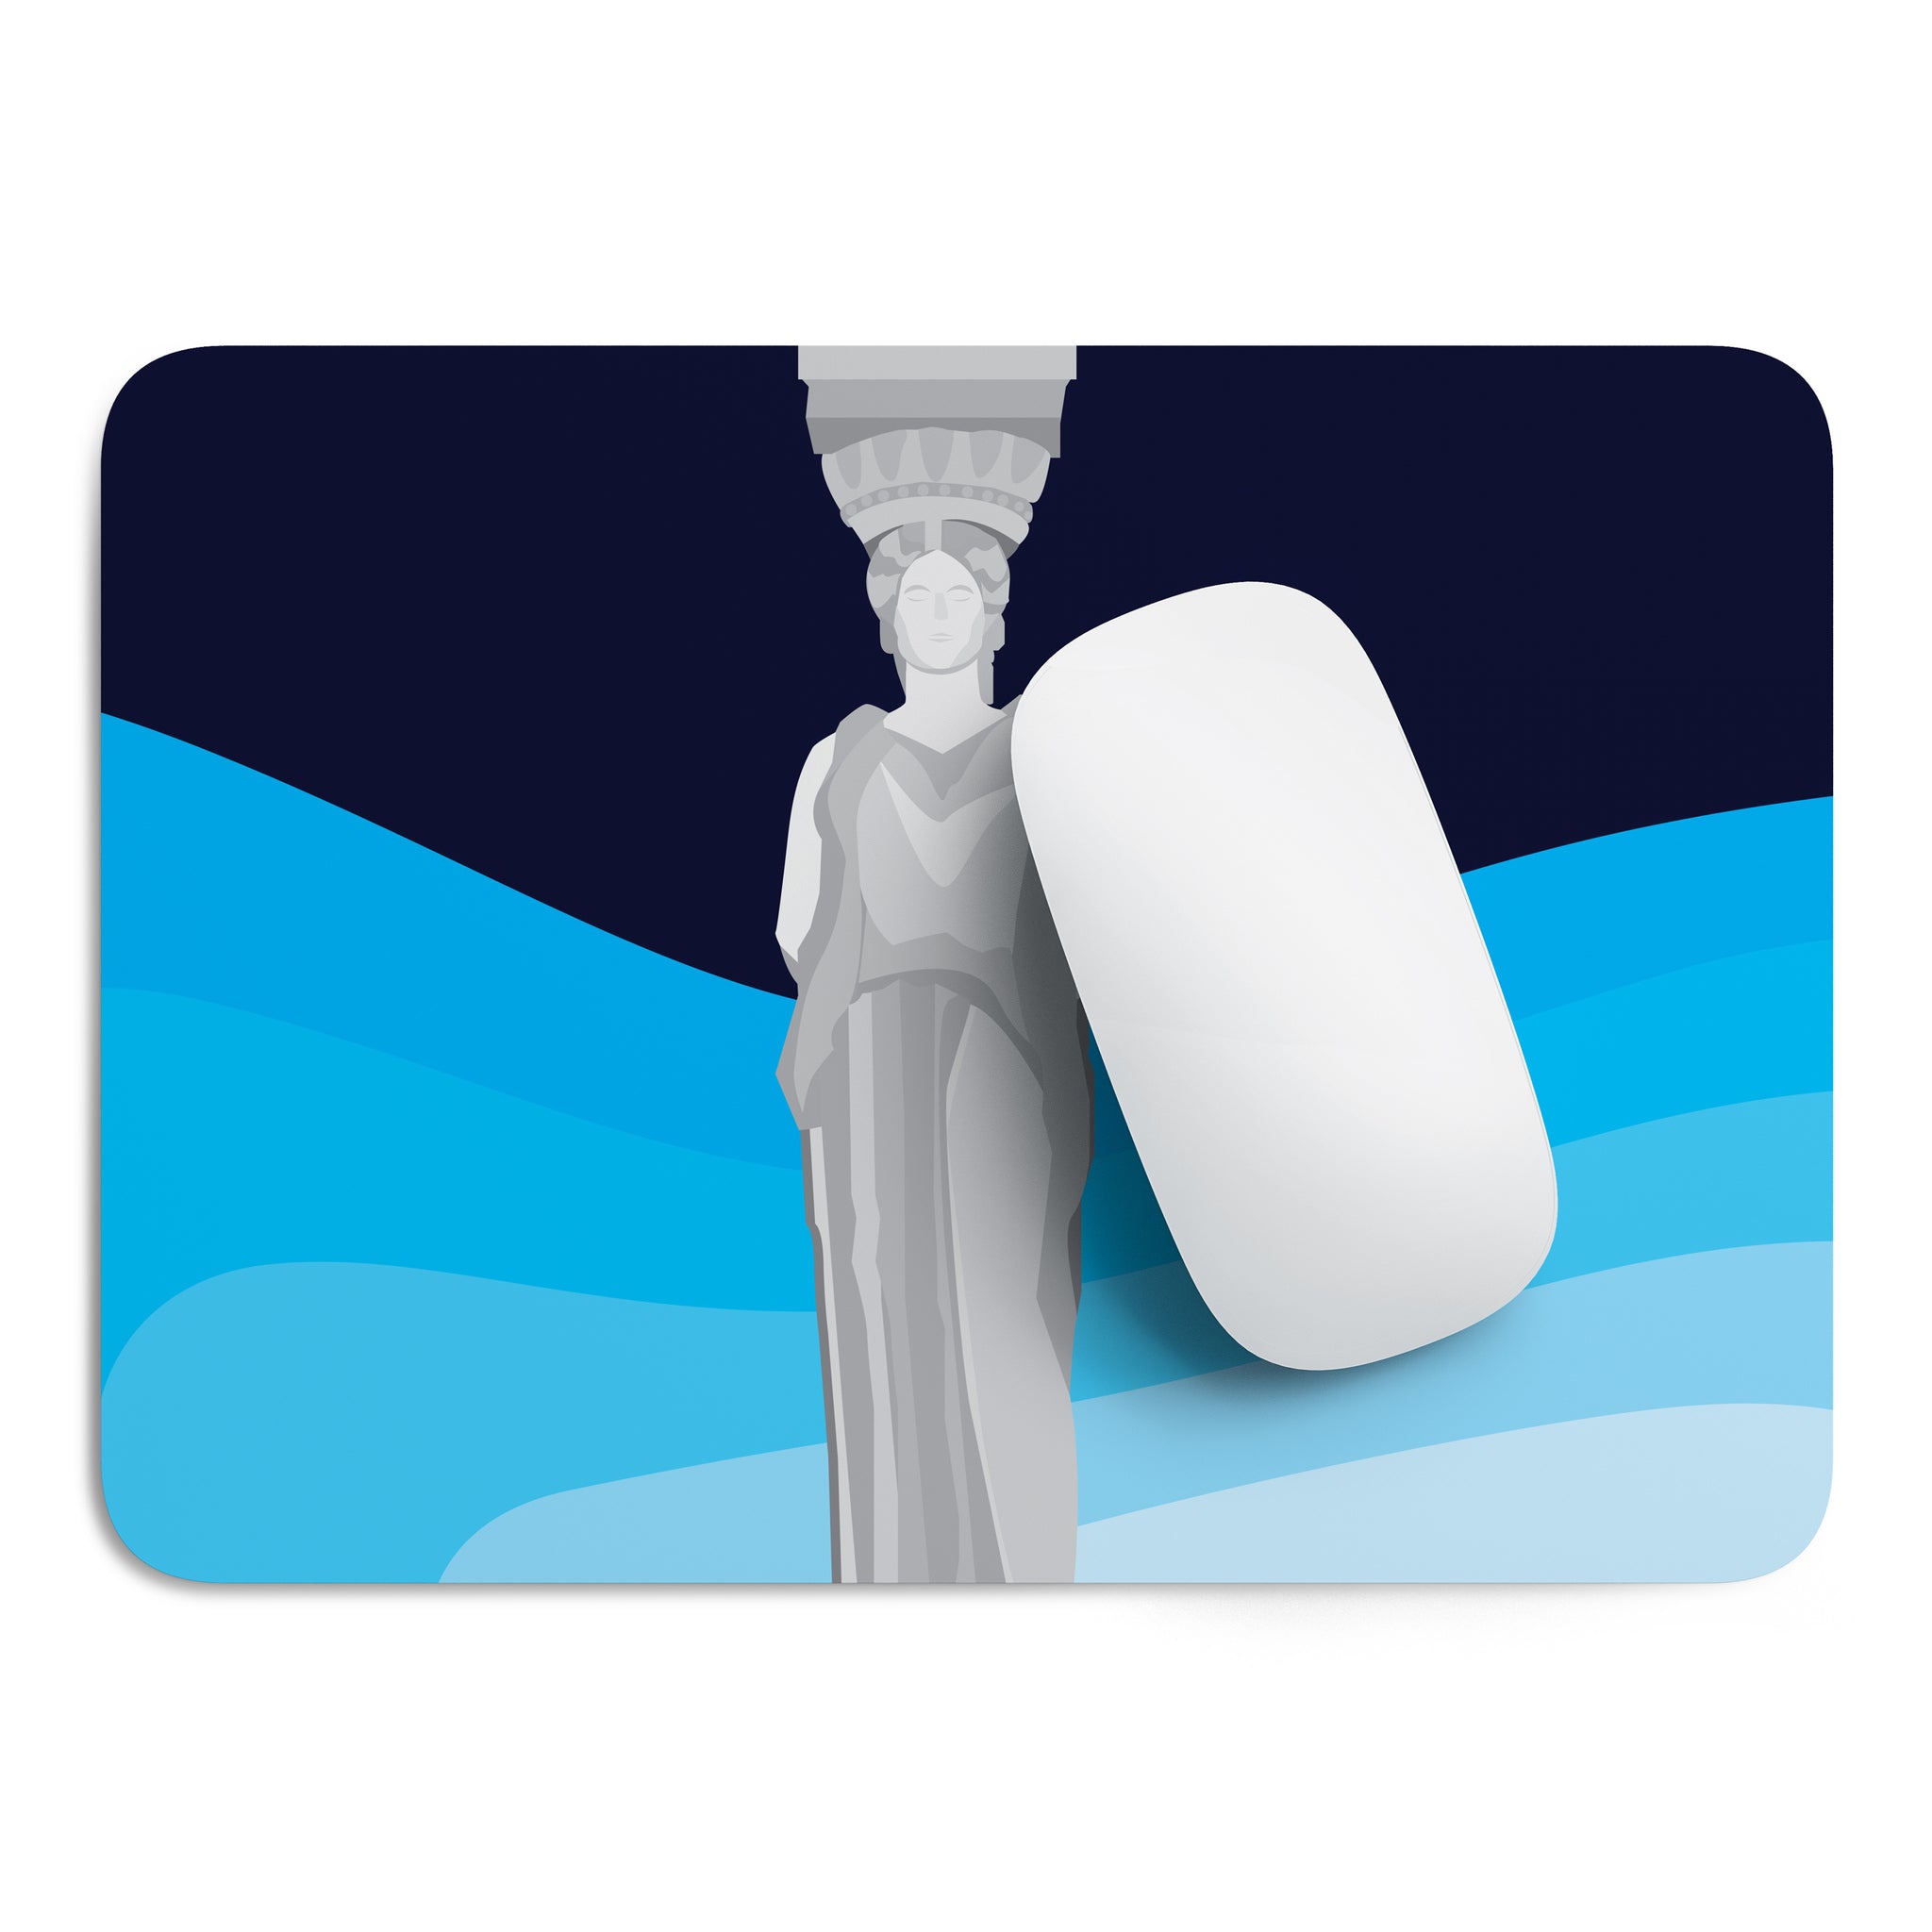 The Caryatide mouse pad